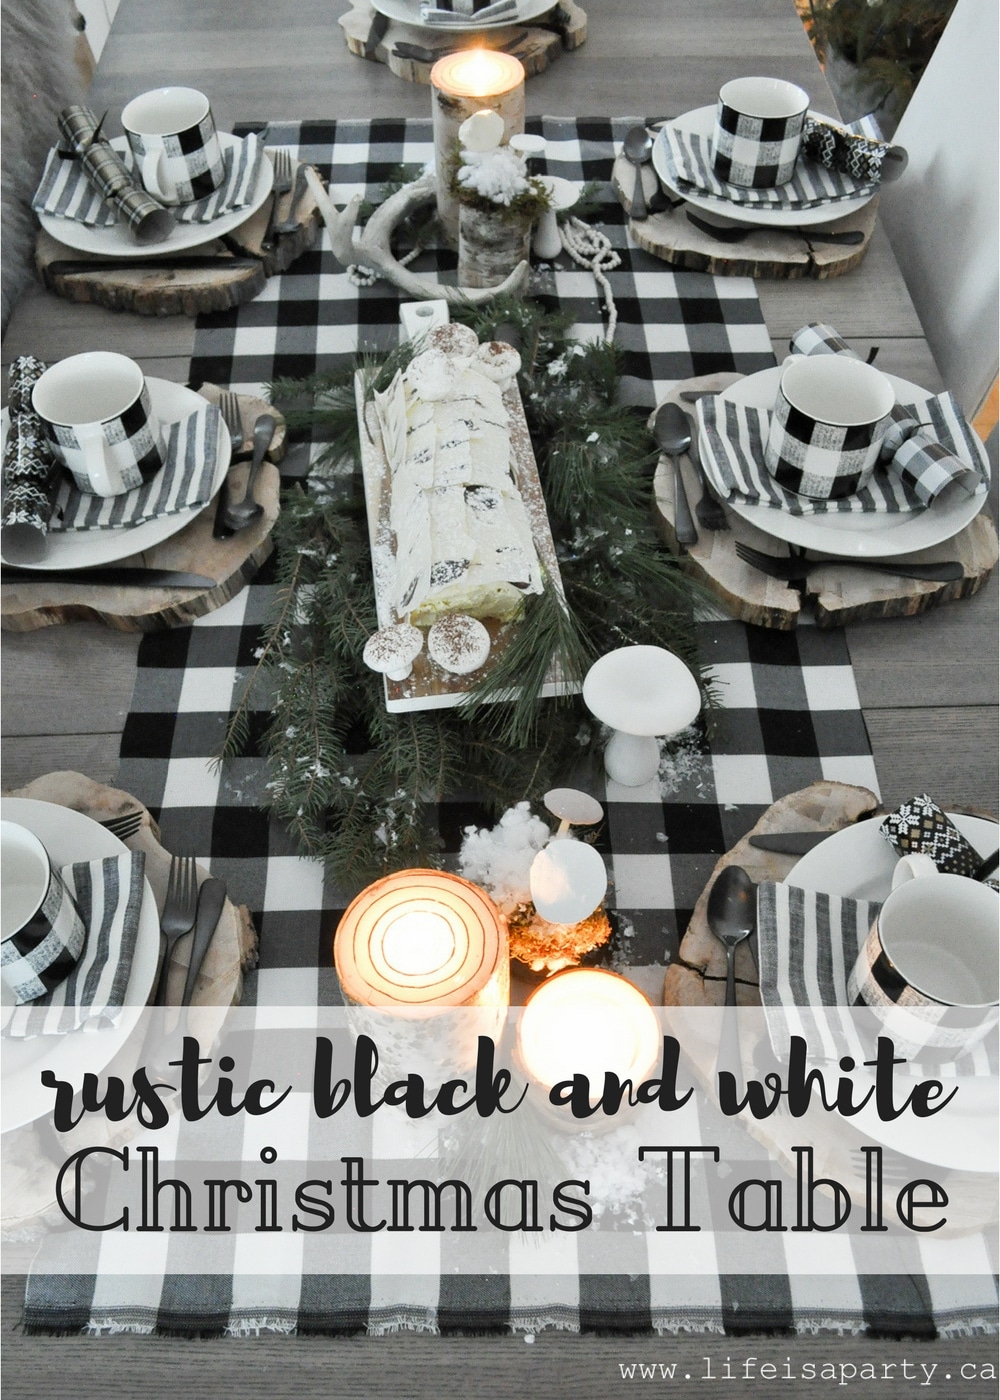 Rustic Black and White Christmas Table -wood chargers, a chocolate birch bark yule log cake, and handmade clay mushrooms make this woodsy table special.